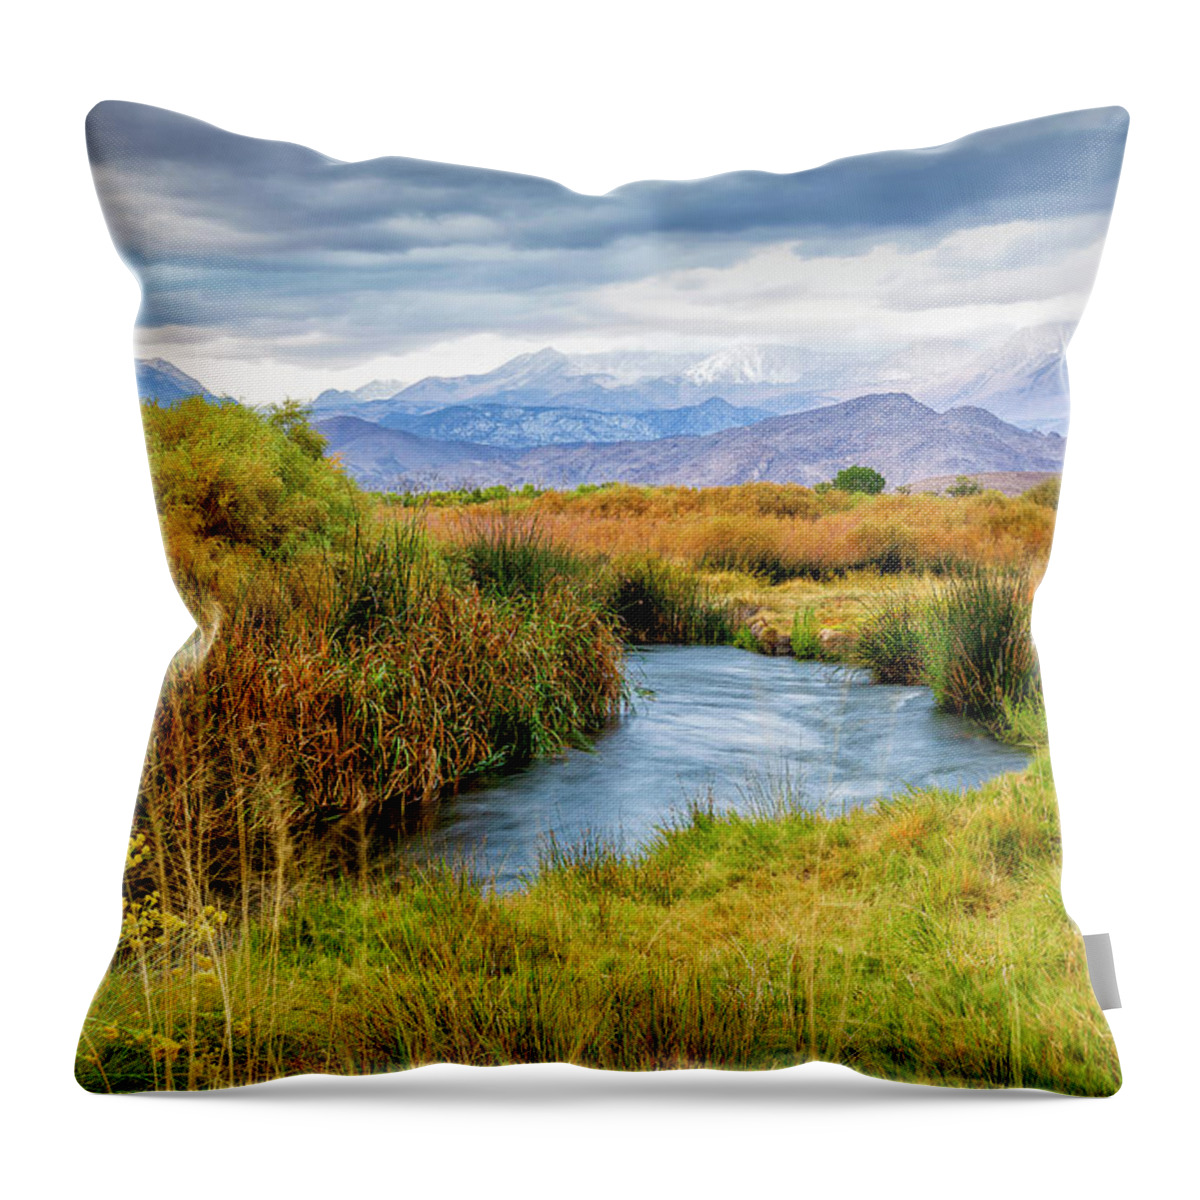 Owens-river Throw Pillow featuring the photograph Owens River by Gary Johnson